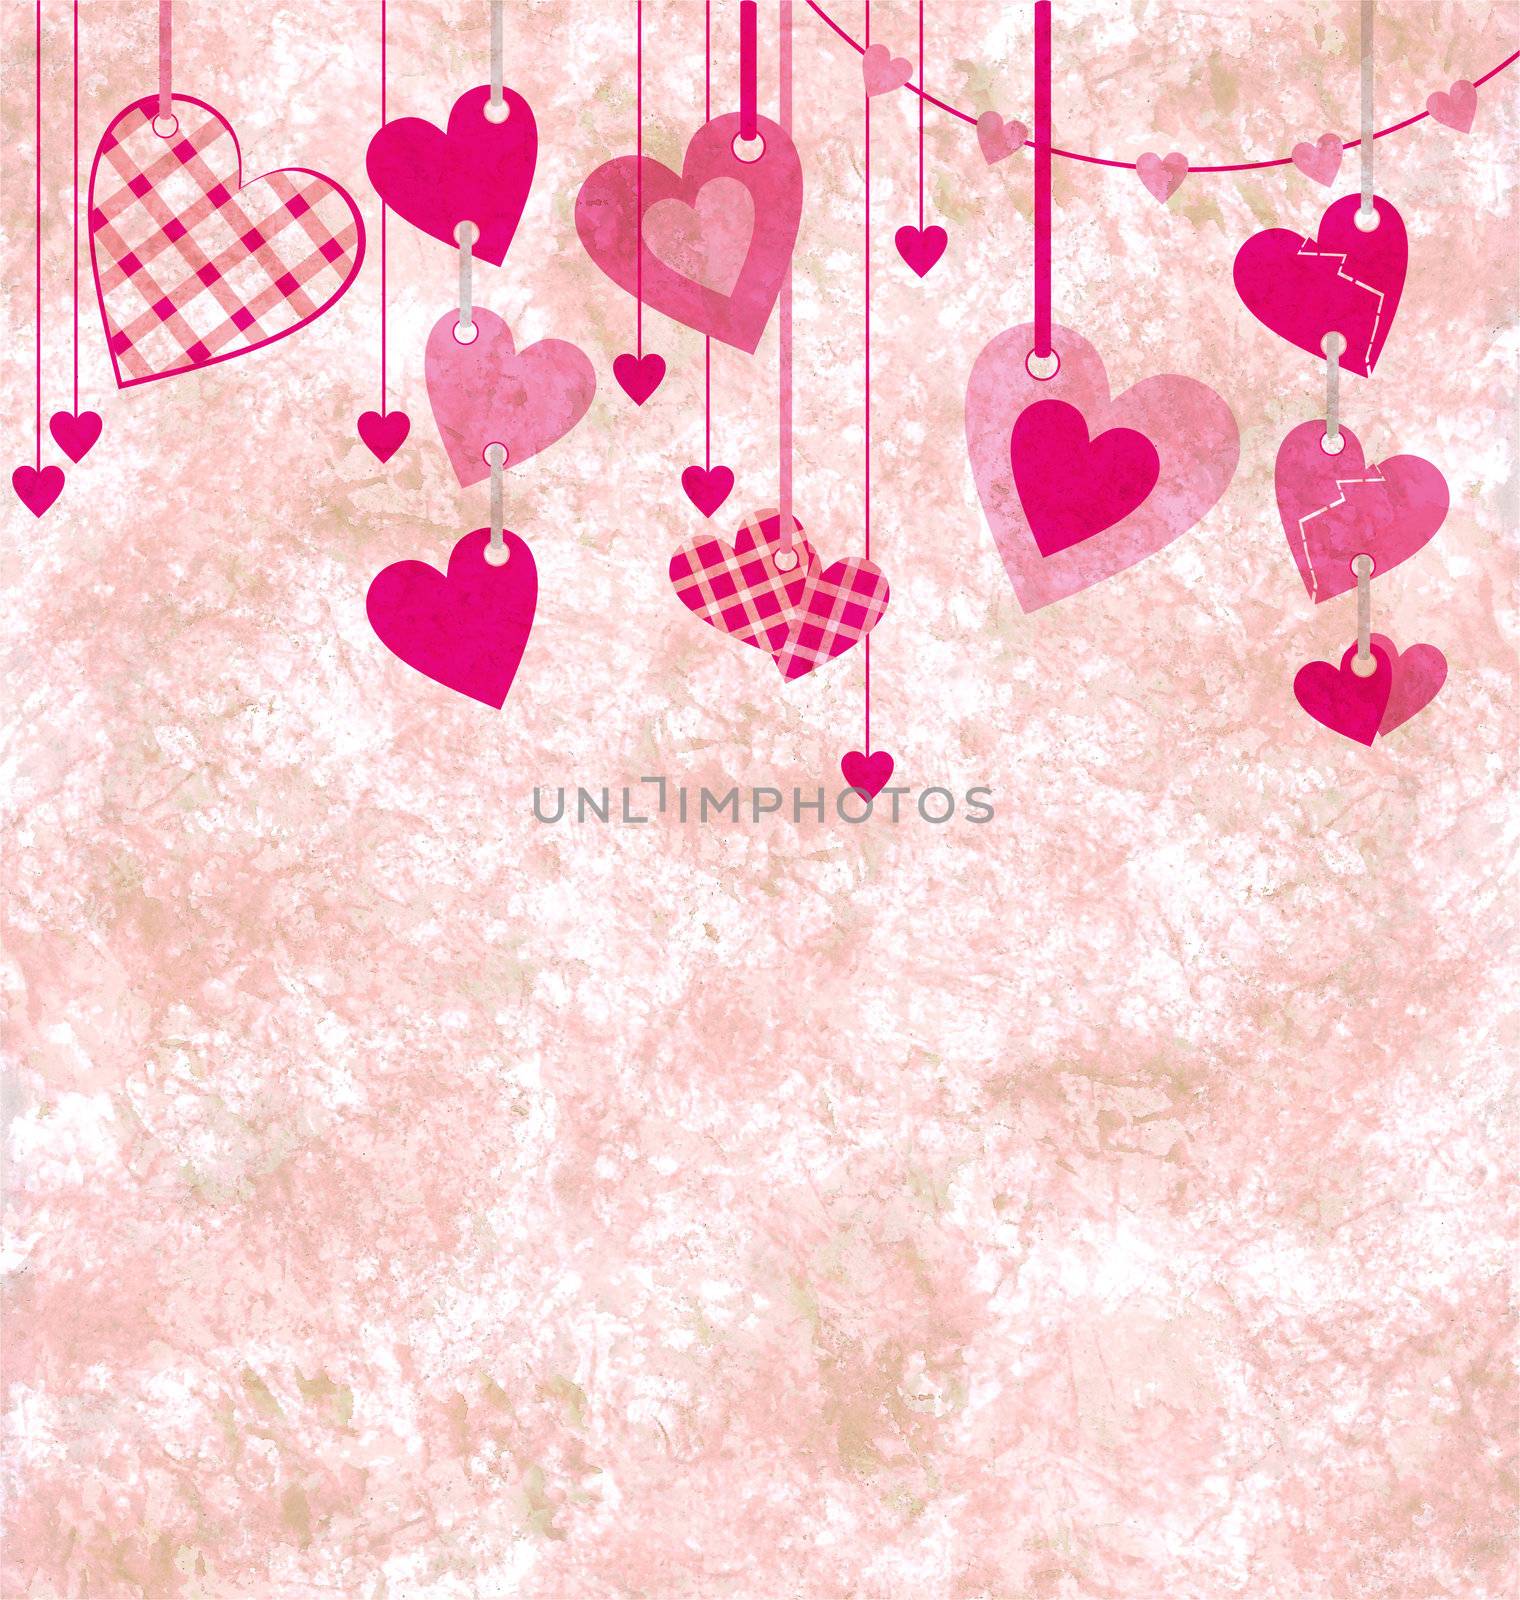 different pink hanging hearts on the grunge light paper backgrou by CherJu